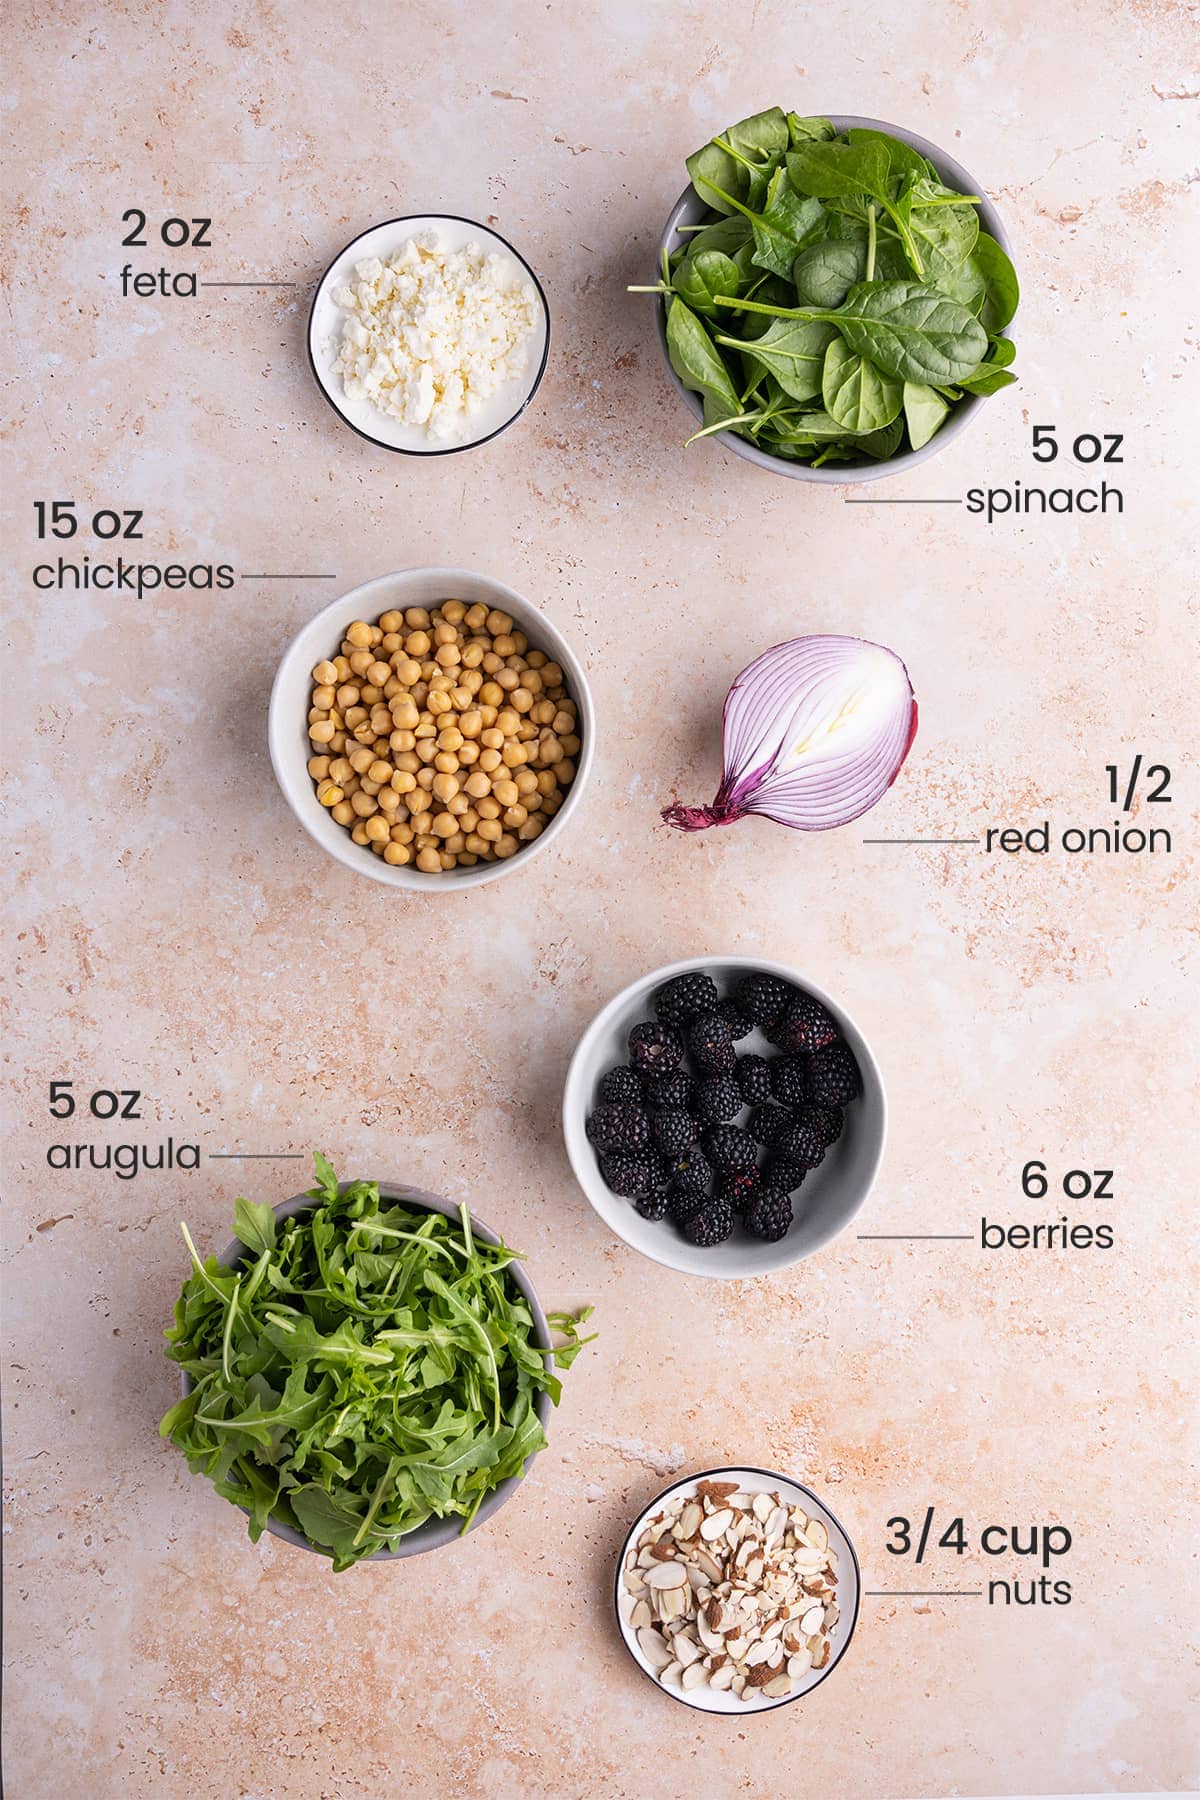 ingredients for spinach arugula salad - feta cheese, spinach, chickpeas, red onion, arugula, berries, nuts